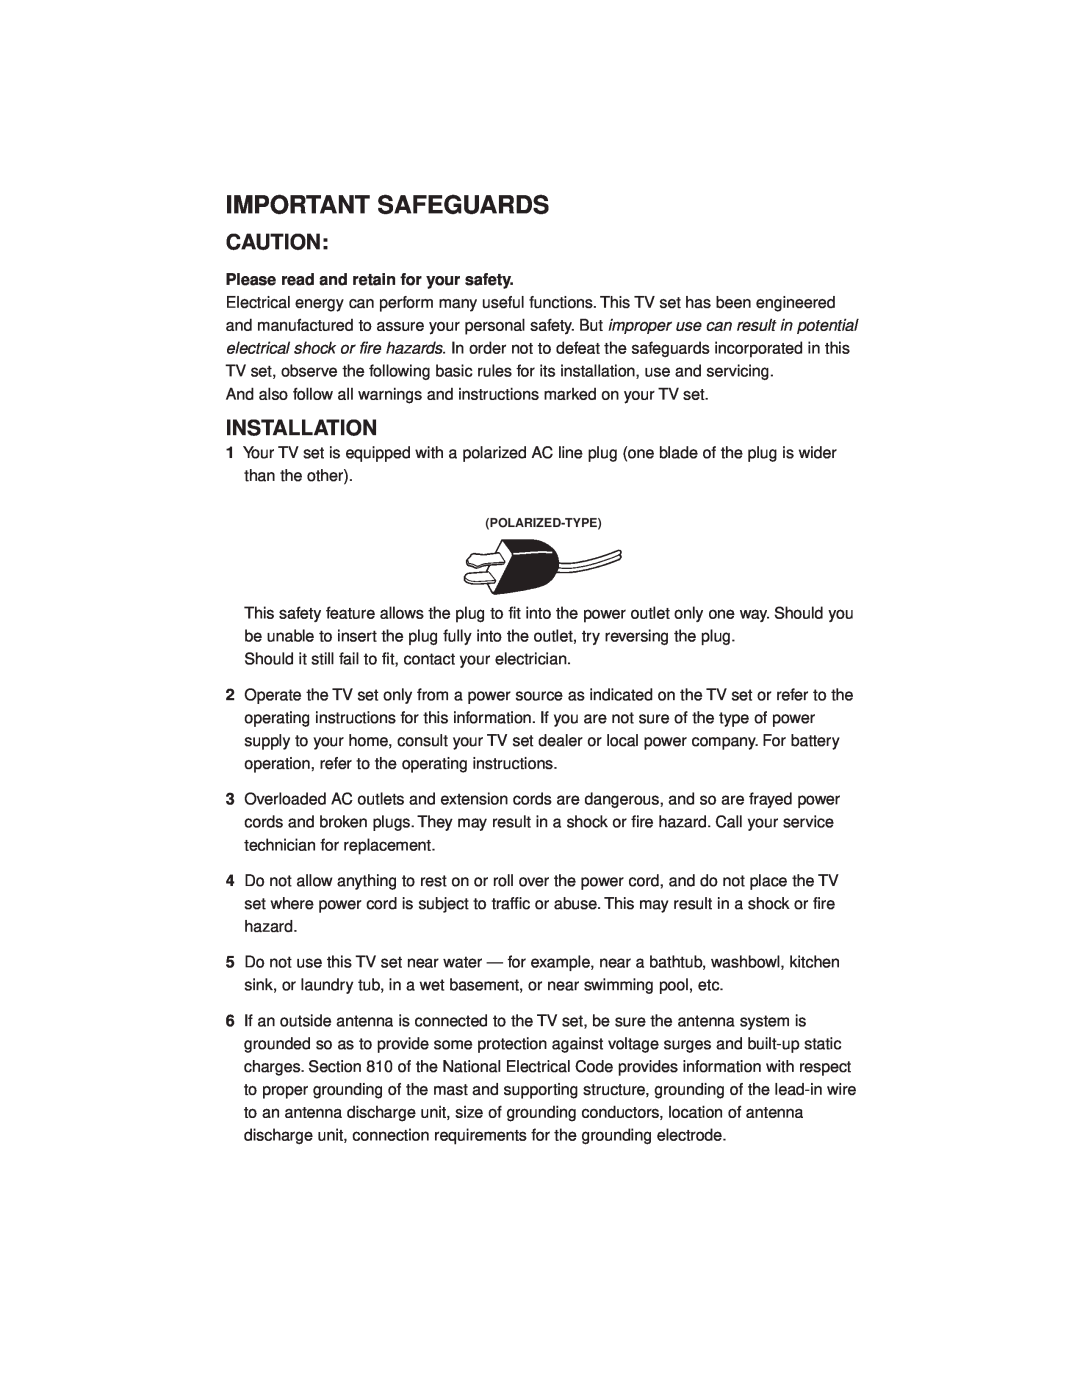 JVC AV-27GFH manual Installation, Important Safeguards, Please read and retain for your safety 